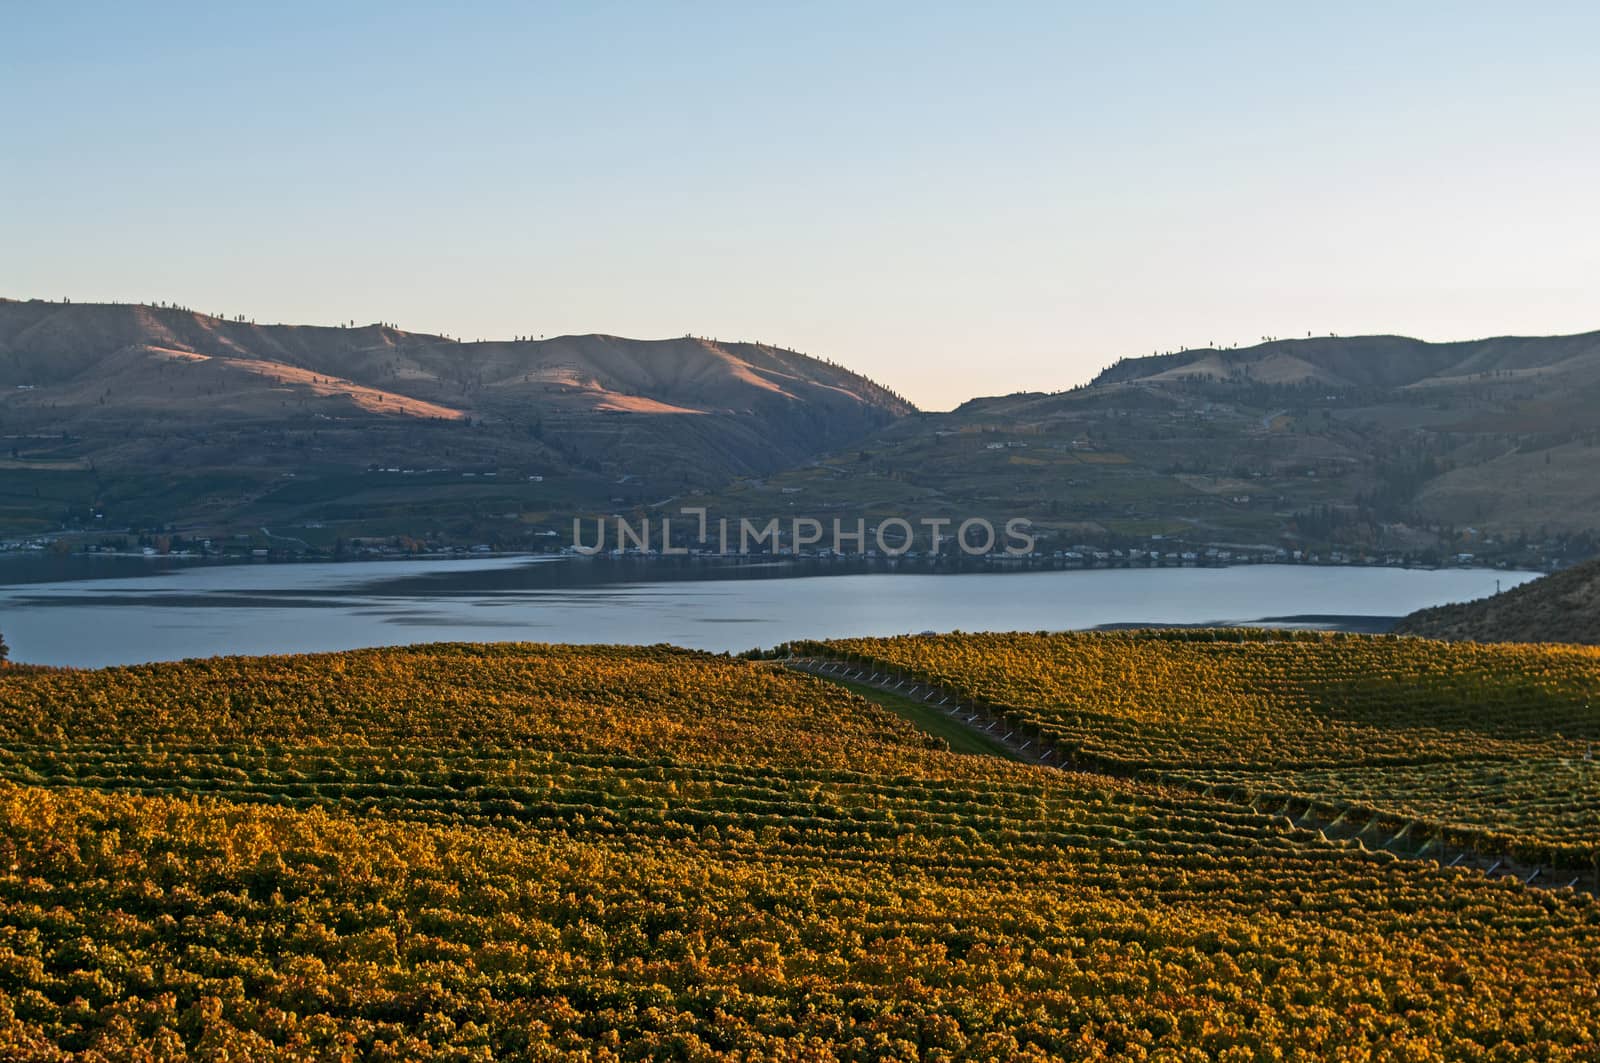 A view of Lake Chelan from the Benson vineyard at sunset by edcorey